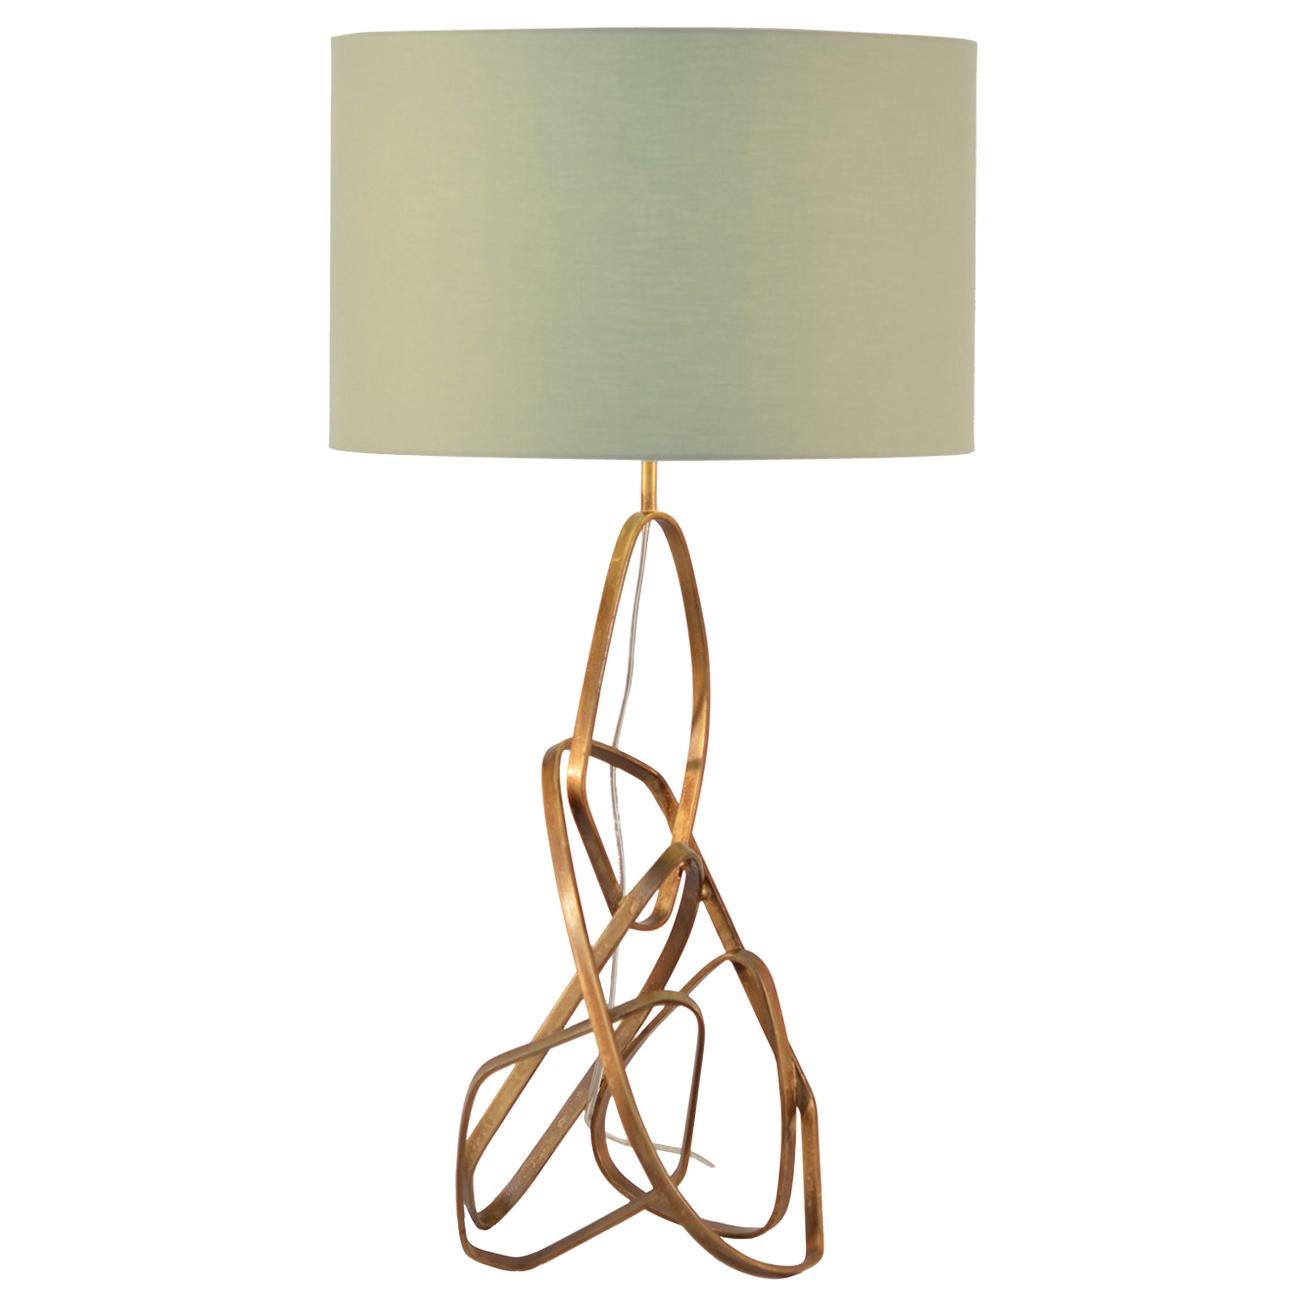 Contemporary Organic Poetic Brass Table Lamp by Cristiana Bertolucci For Sale